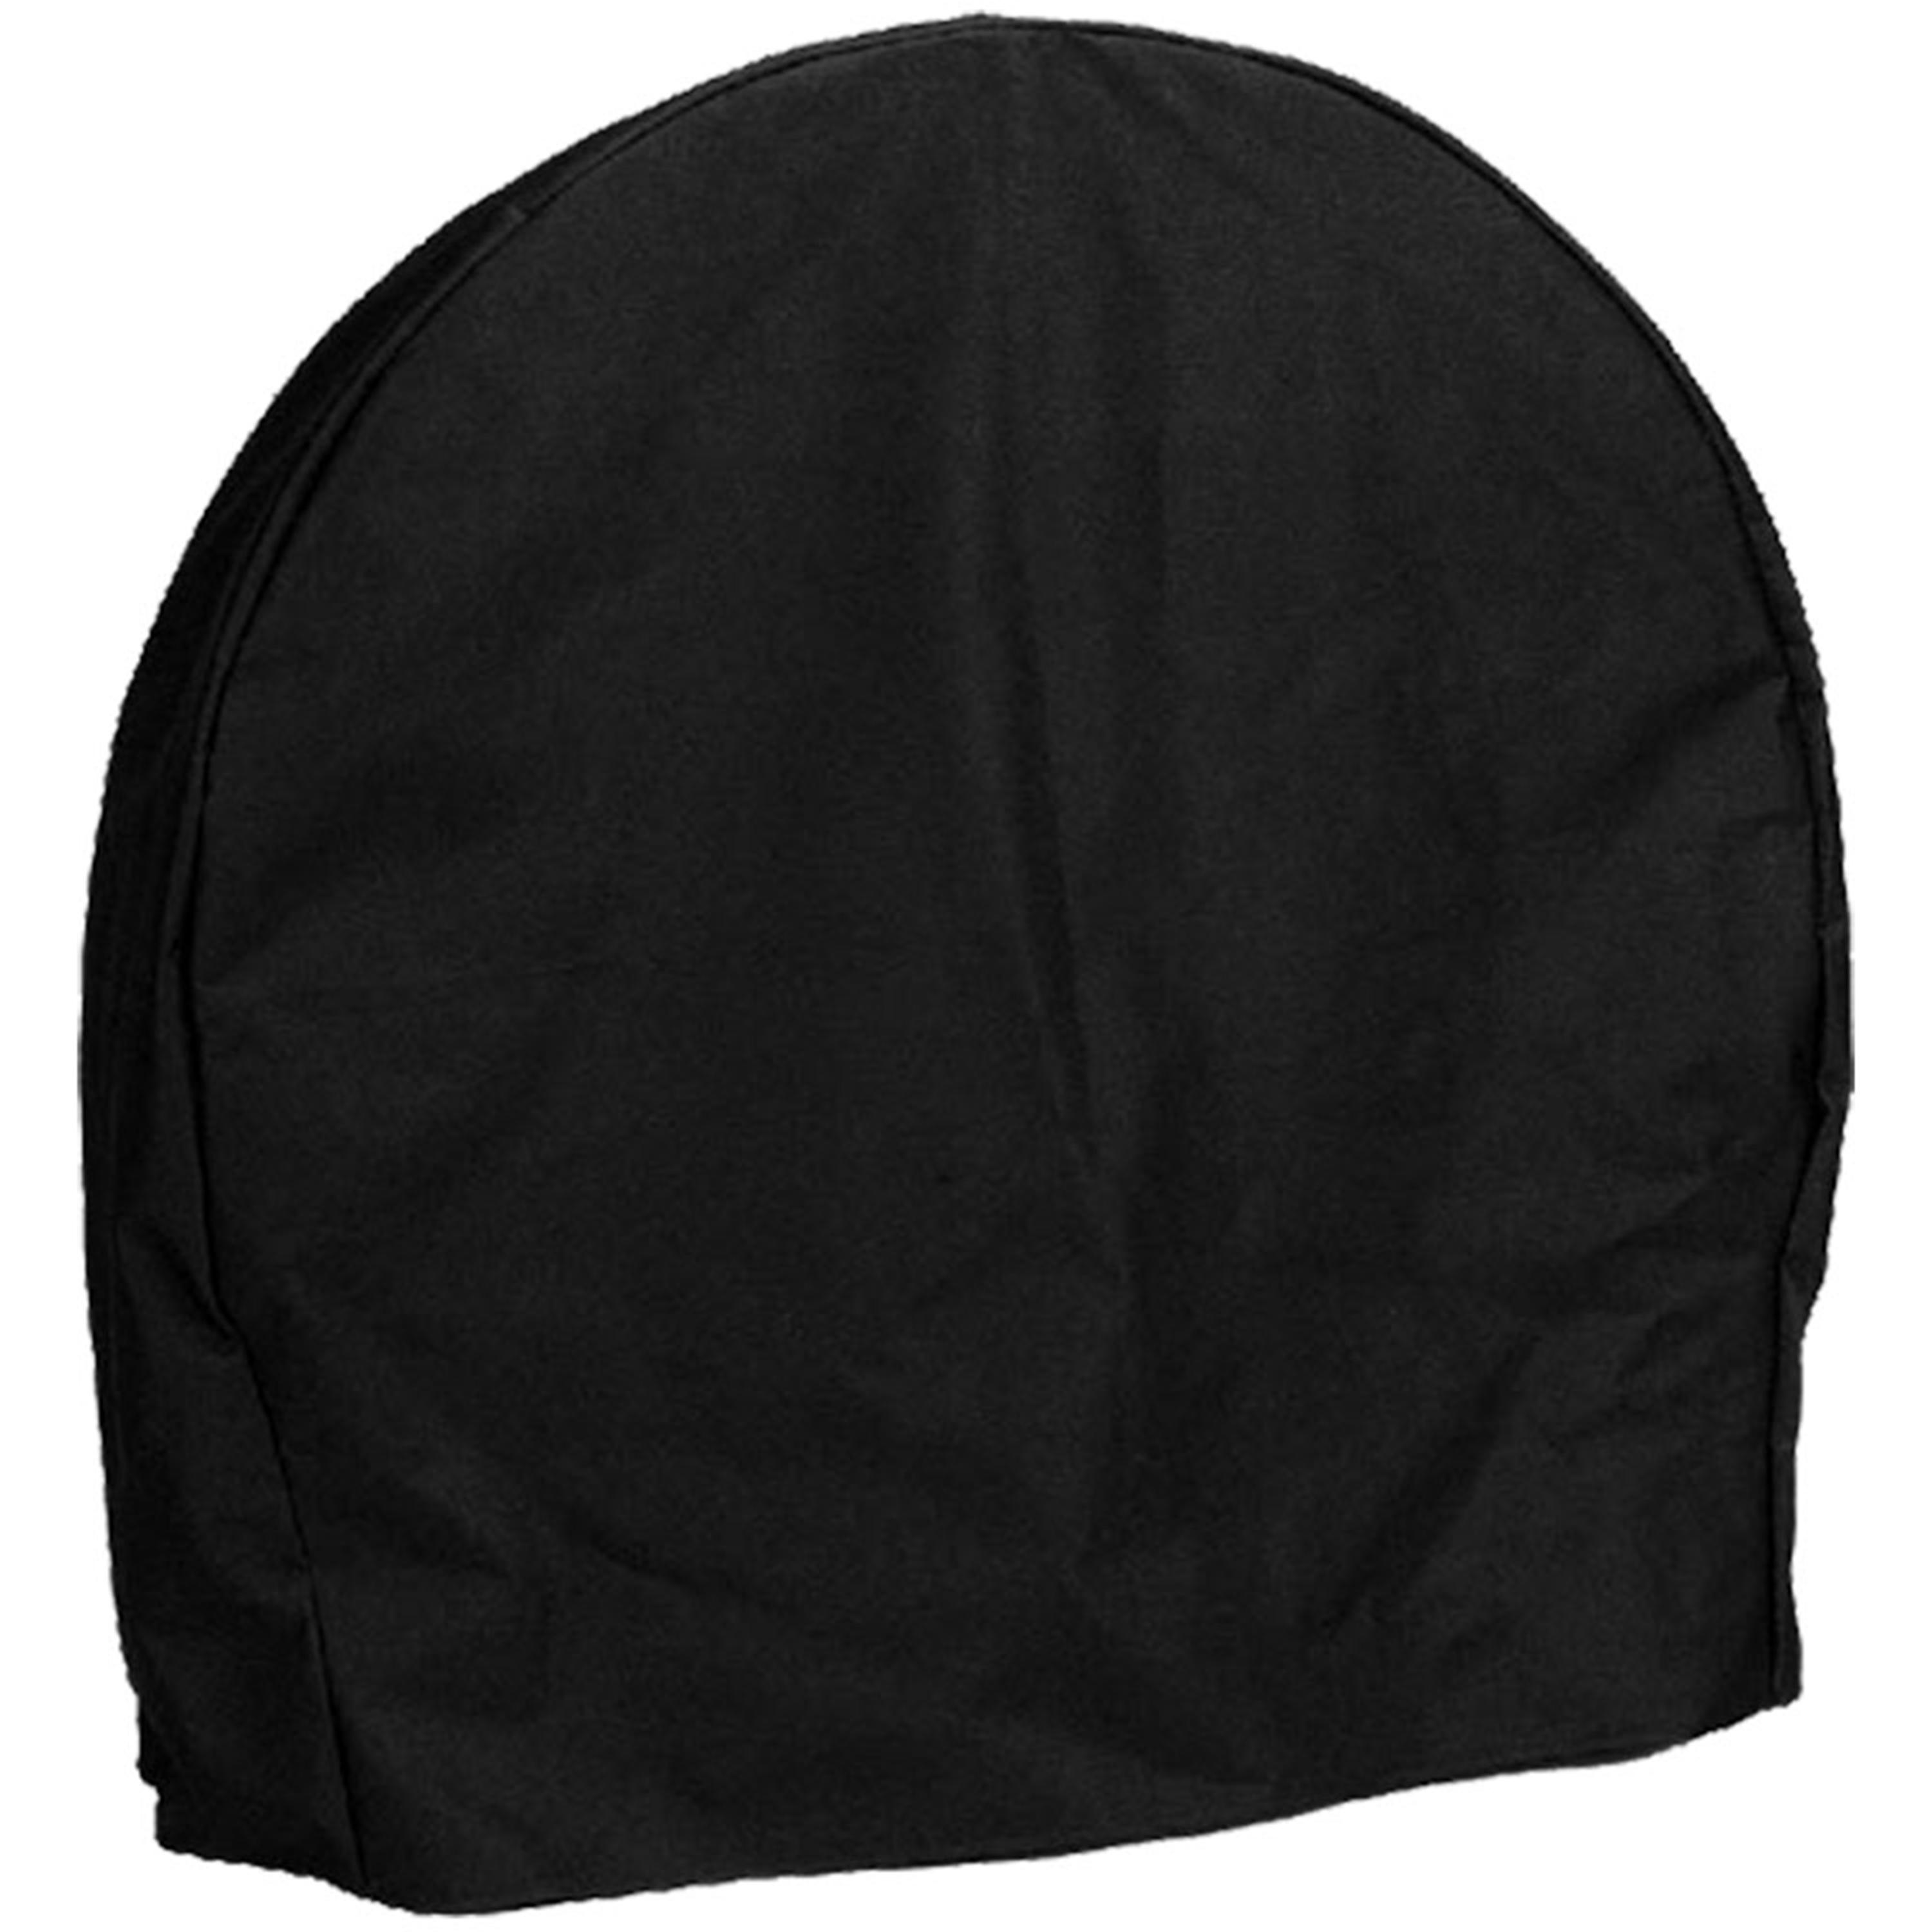 Sunnydaze Log Hoop Cover, Size and Color Options Available, Black, 40-Inch